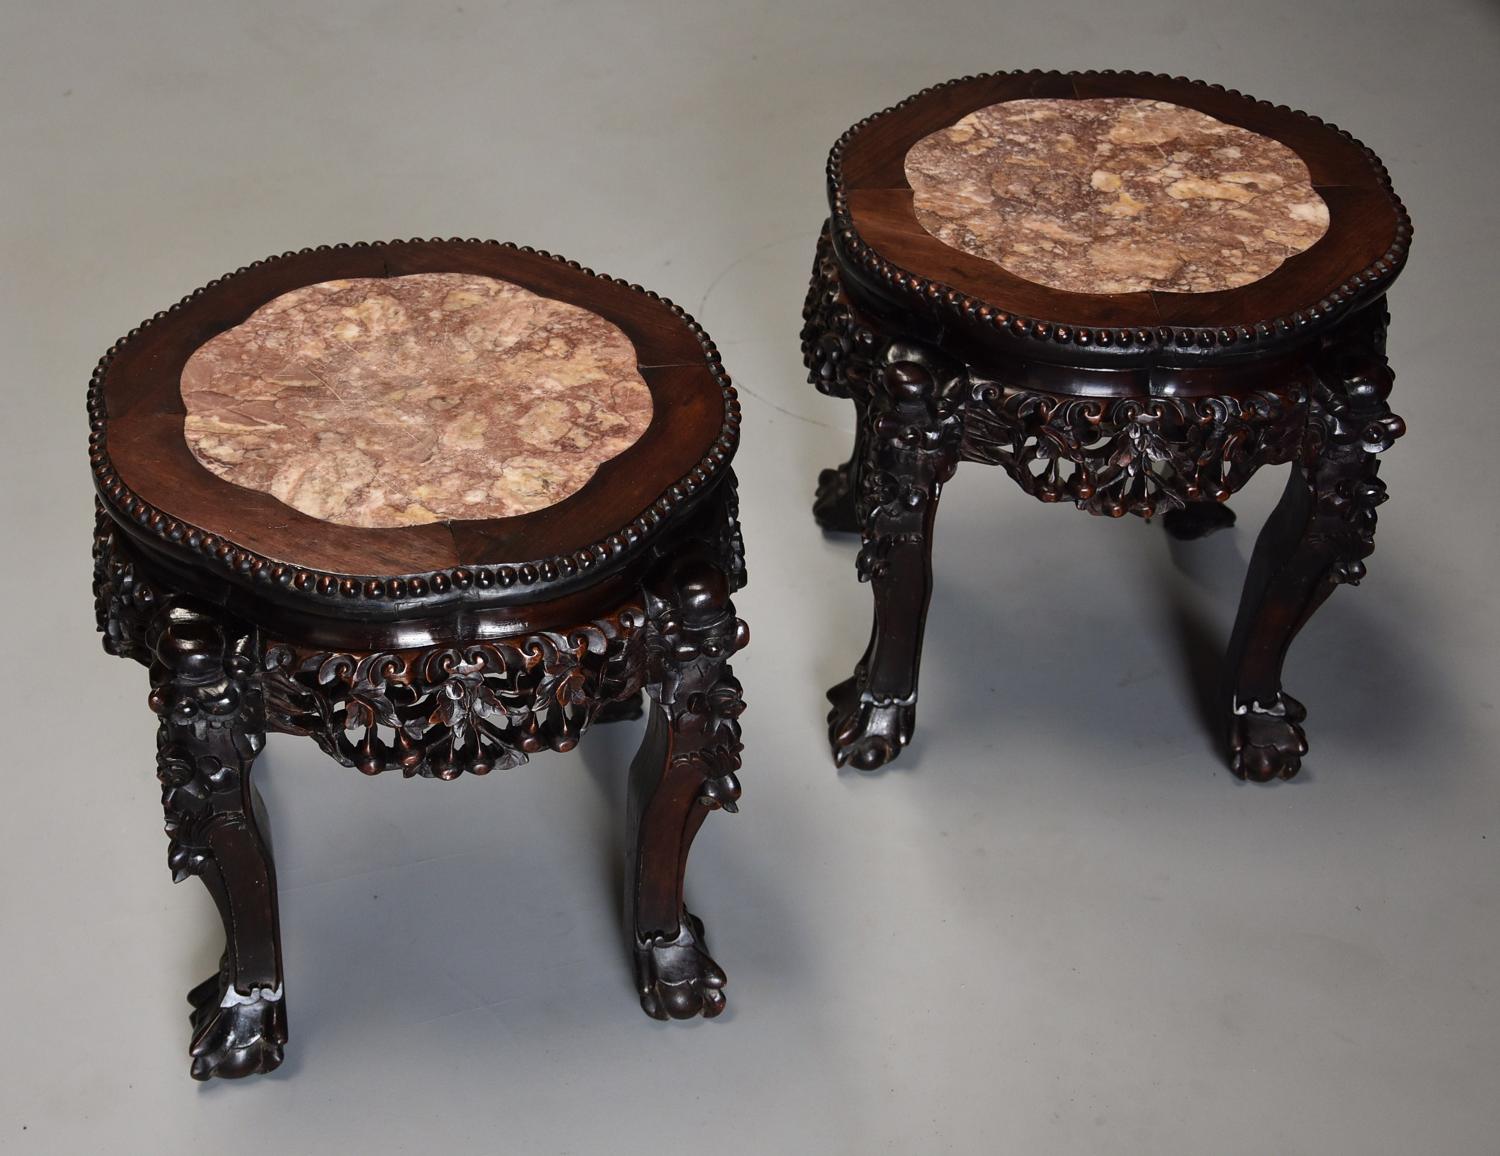 Pair of late 19th century Chinese pot stands or low tables